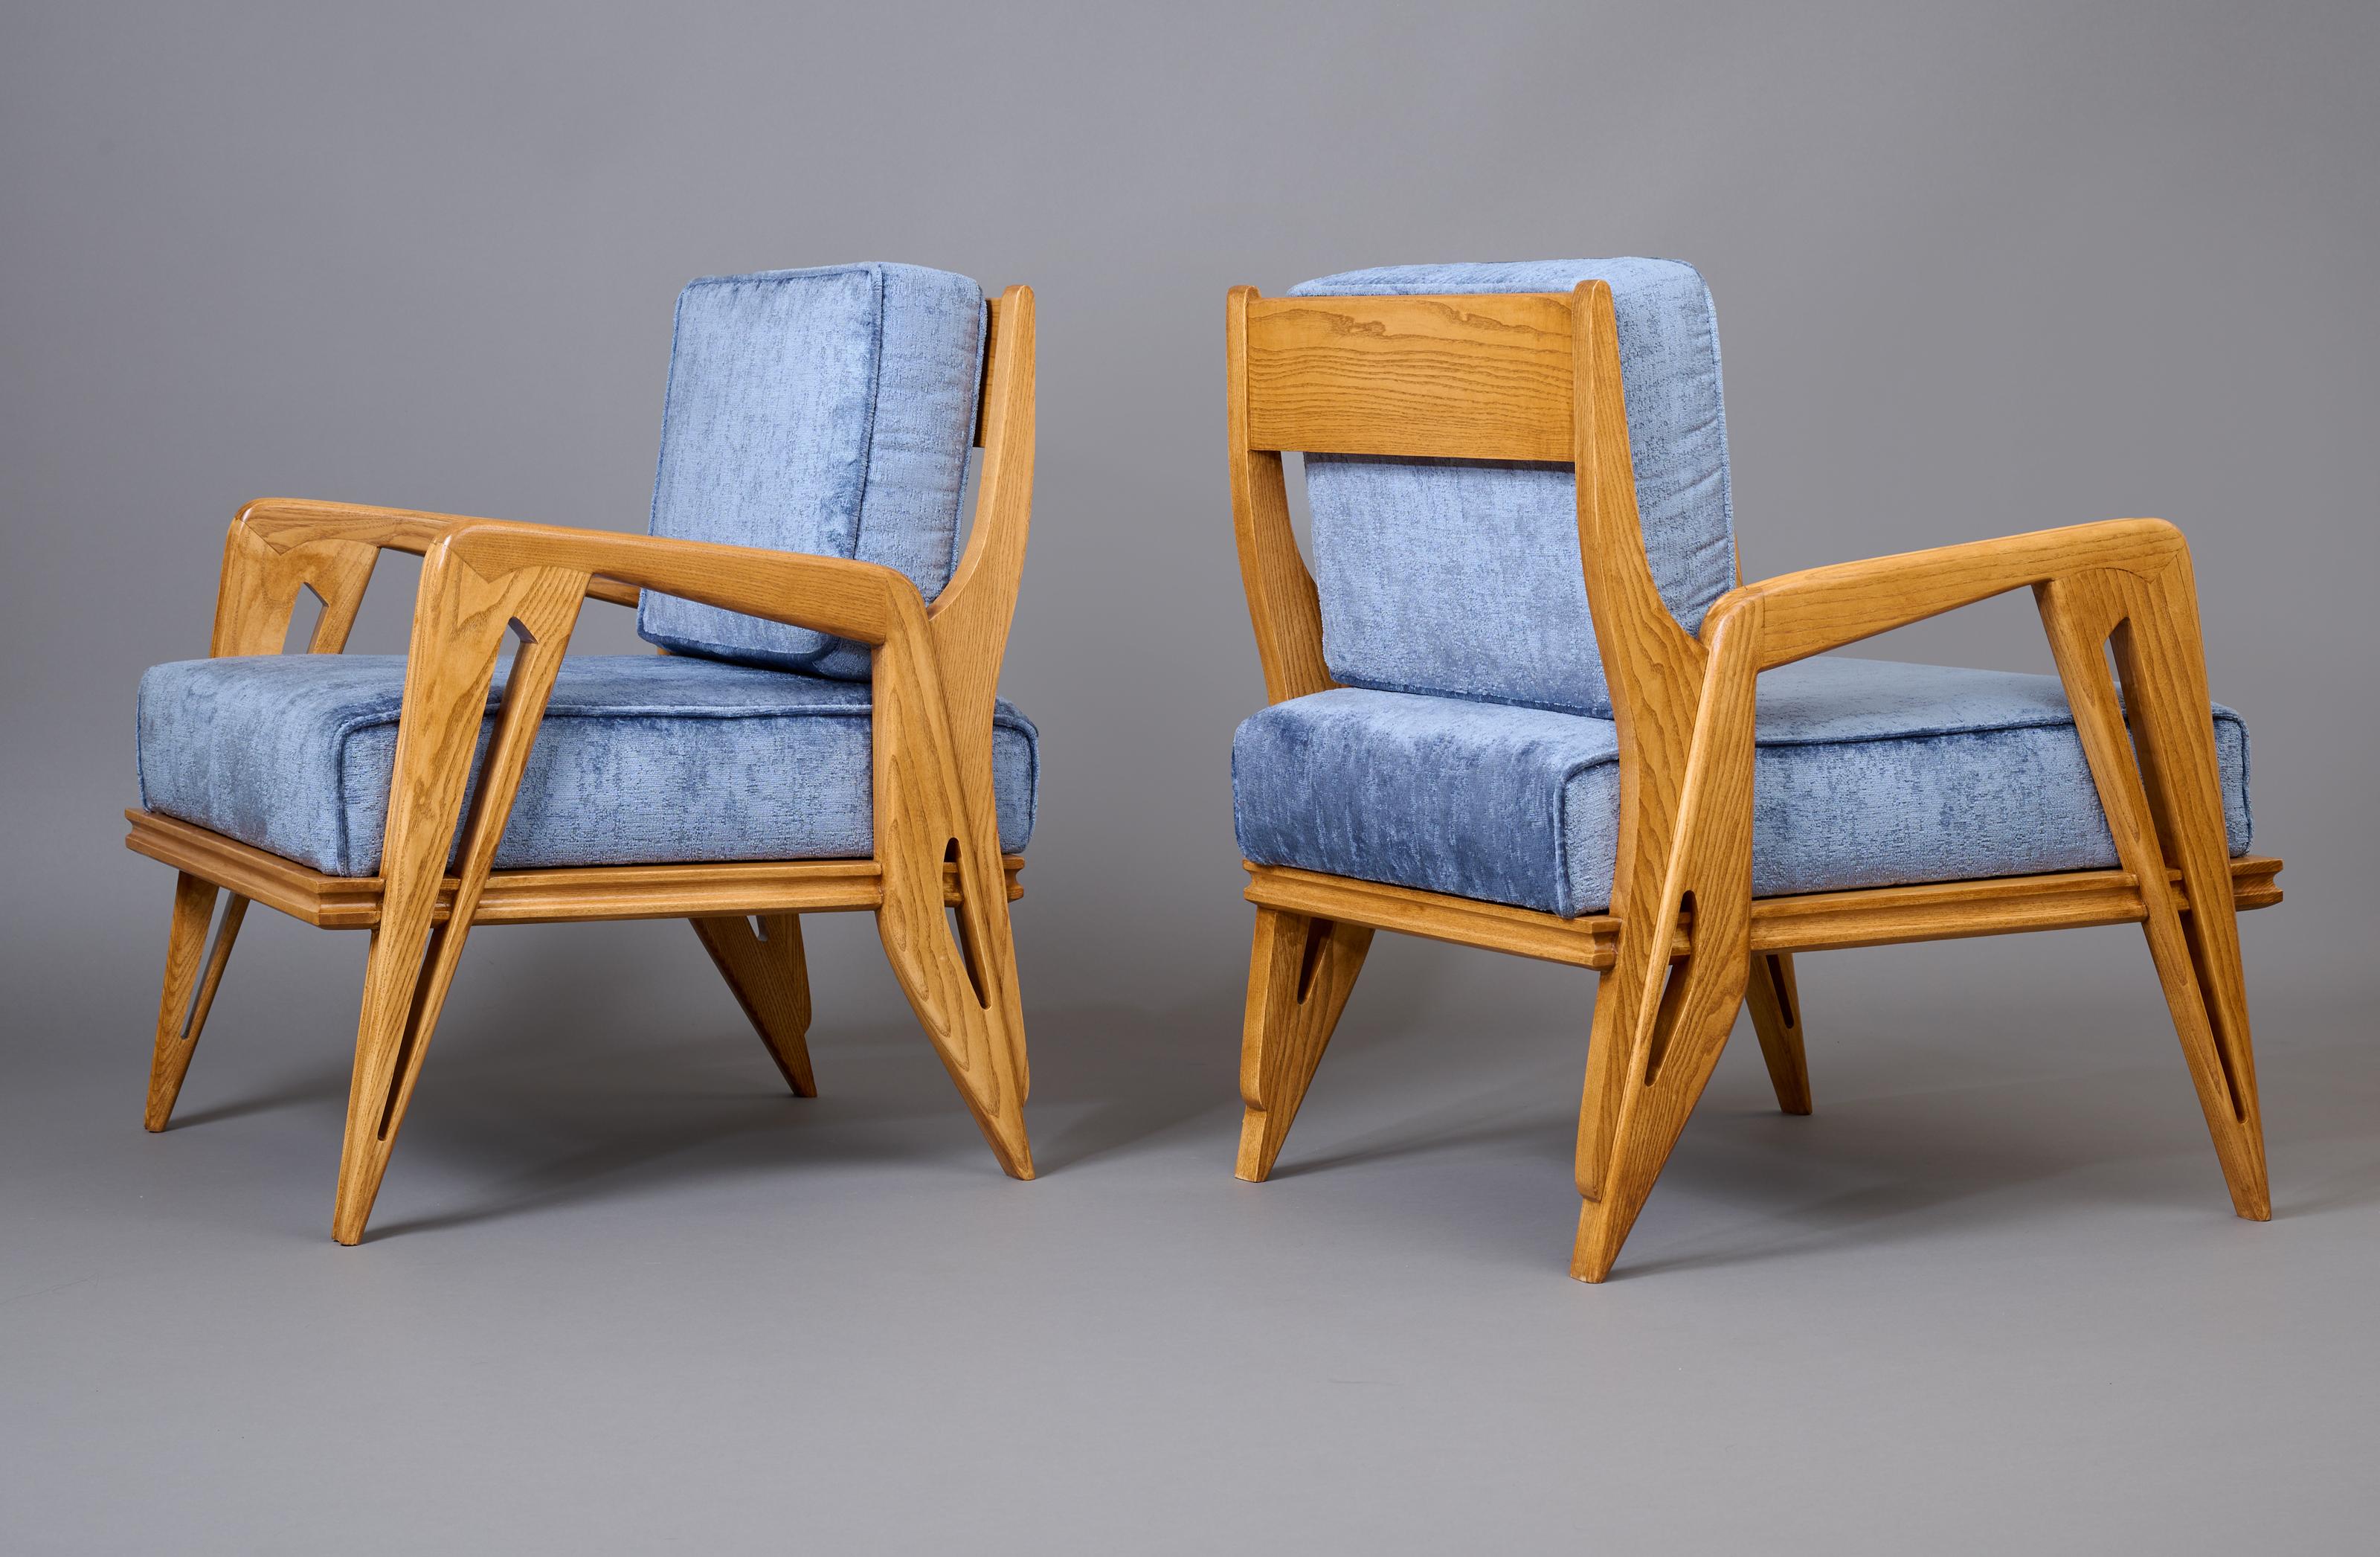 School of Turin 

An energetic, sculptural pair of modernist armchairs in blond oak, upholstered in blue velvet. With their dynamic engineering, these masterful School of Turin chairs take the organic voids of Carlo Mollino to biomorphic heights.